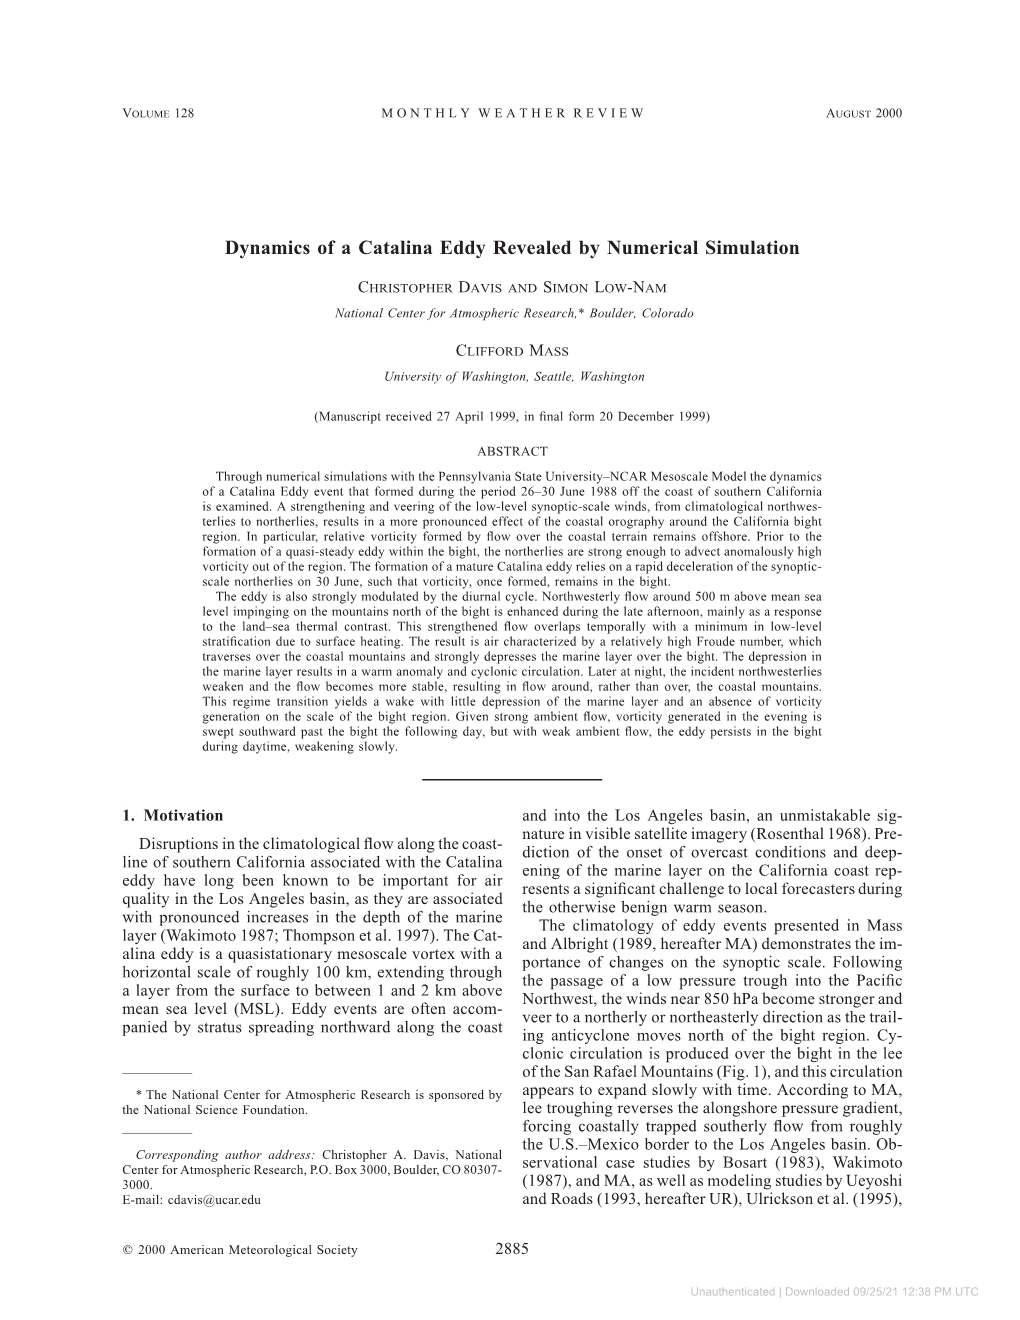 Dynamics of a Catalina Eddy Revealed by Numerical Simulation